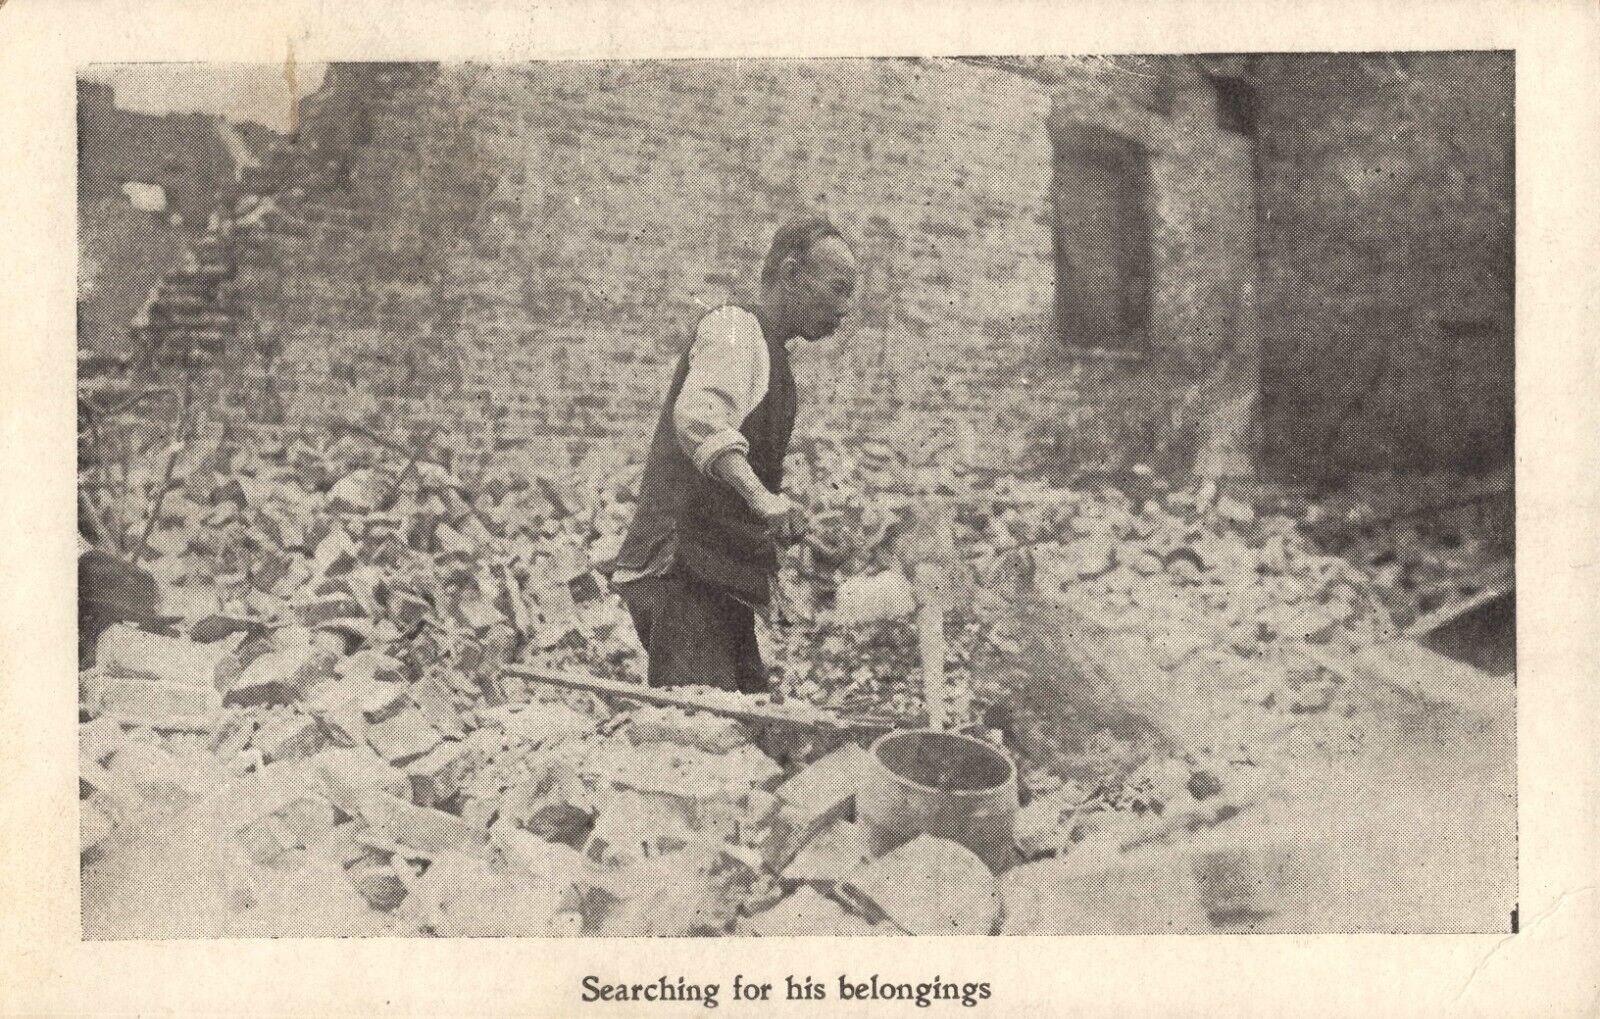 Chinese Man Searching for His Belongings San Francisco Earthquake 1906 Postcard